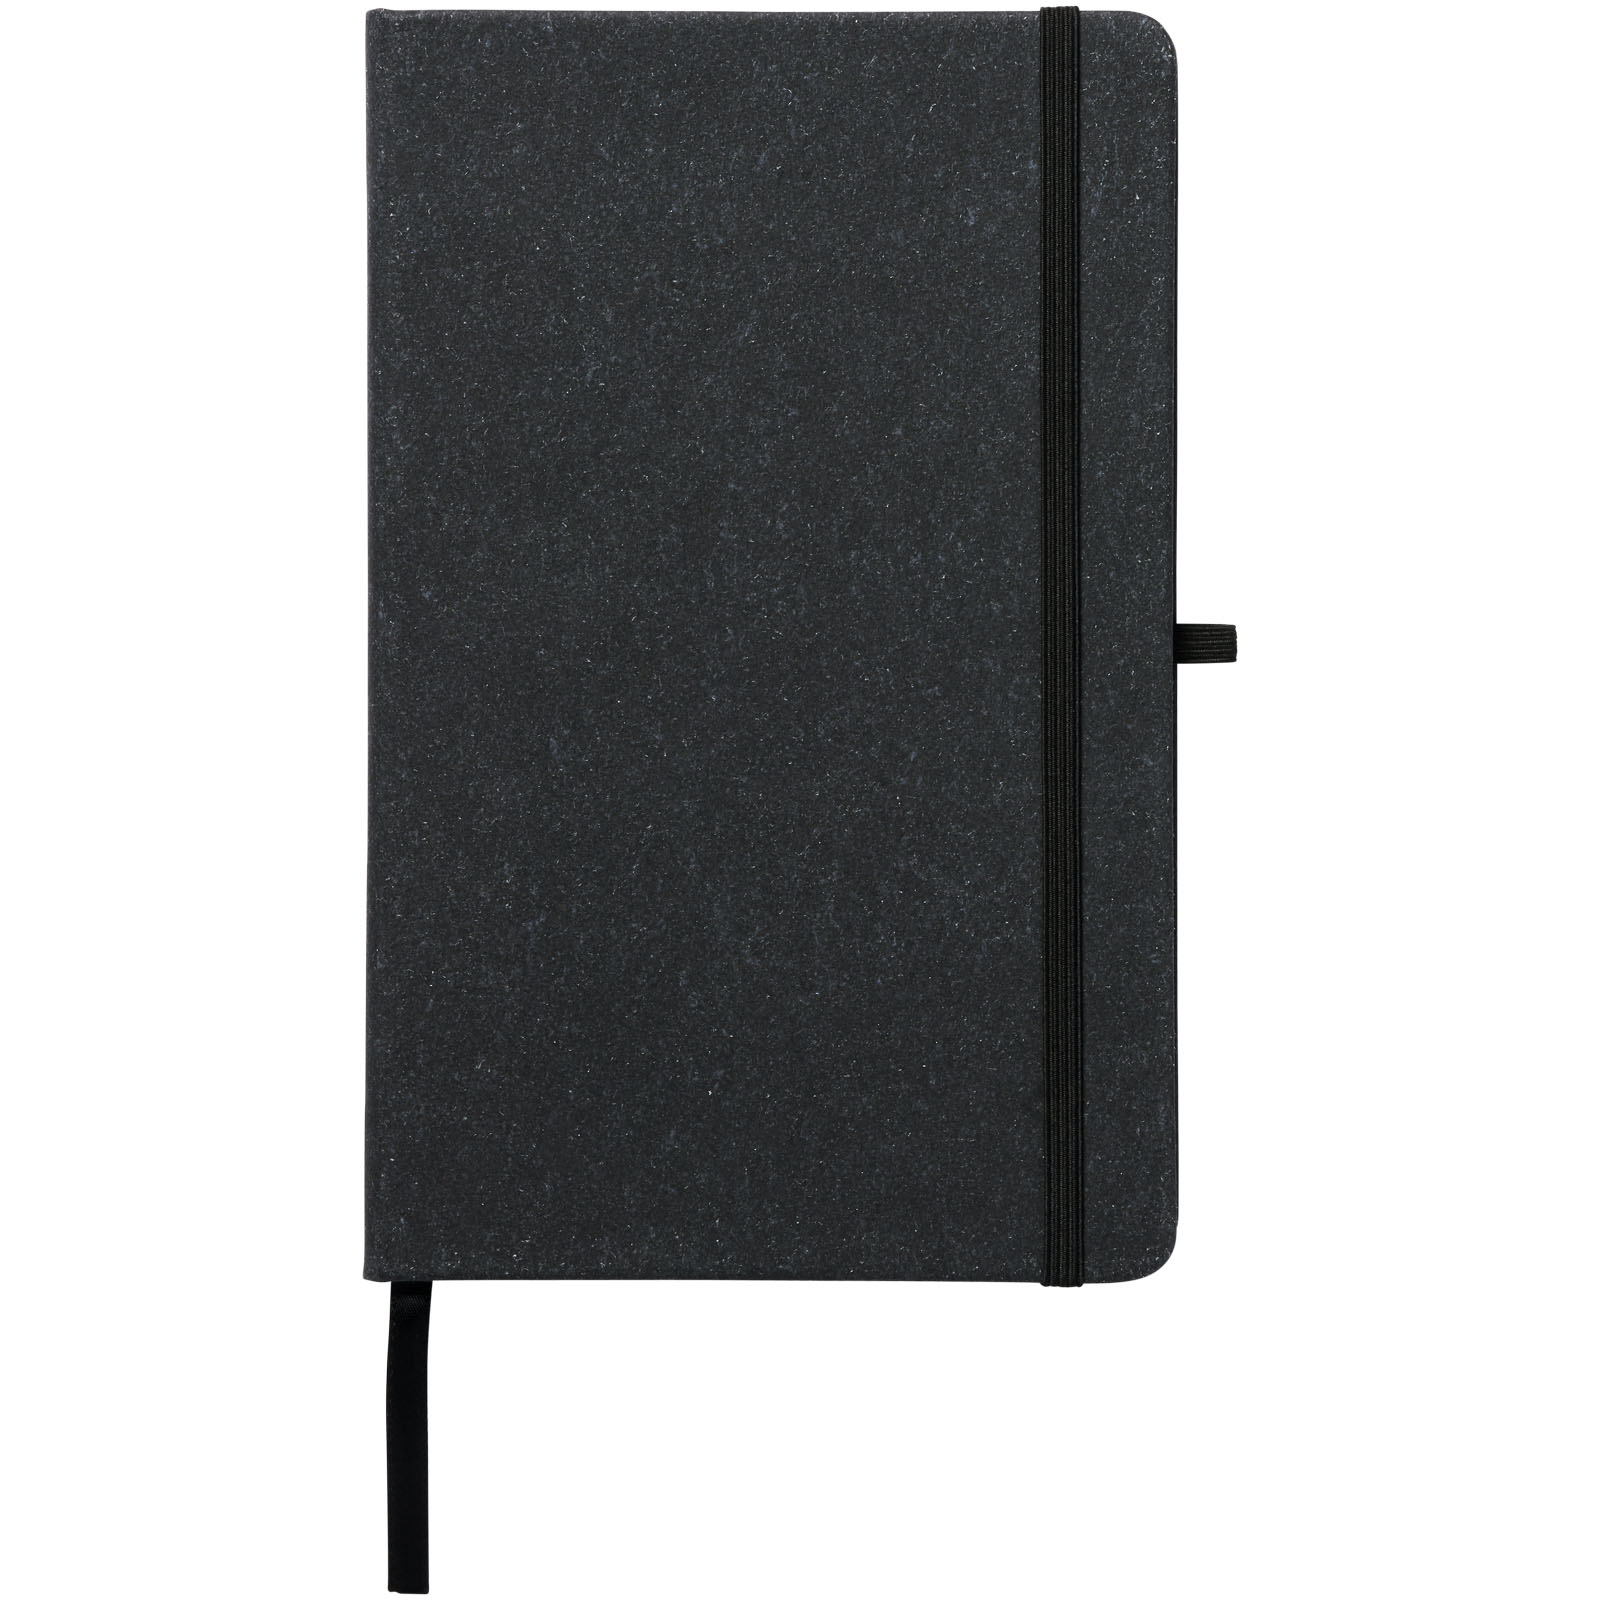 Advertising Hard cover notebooks - Atlana leather pieces notebook - 1